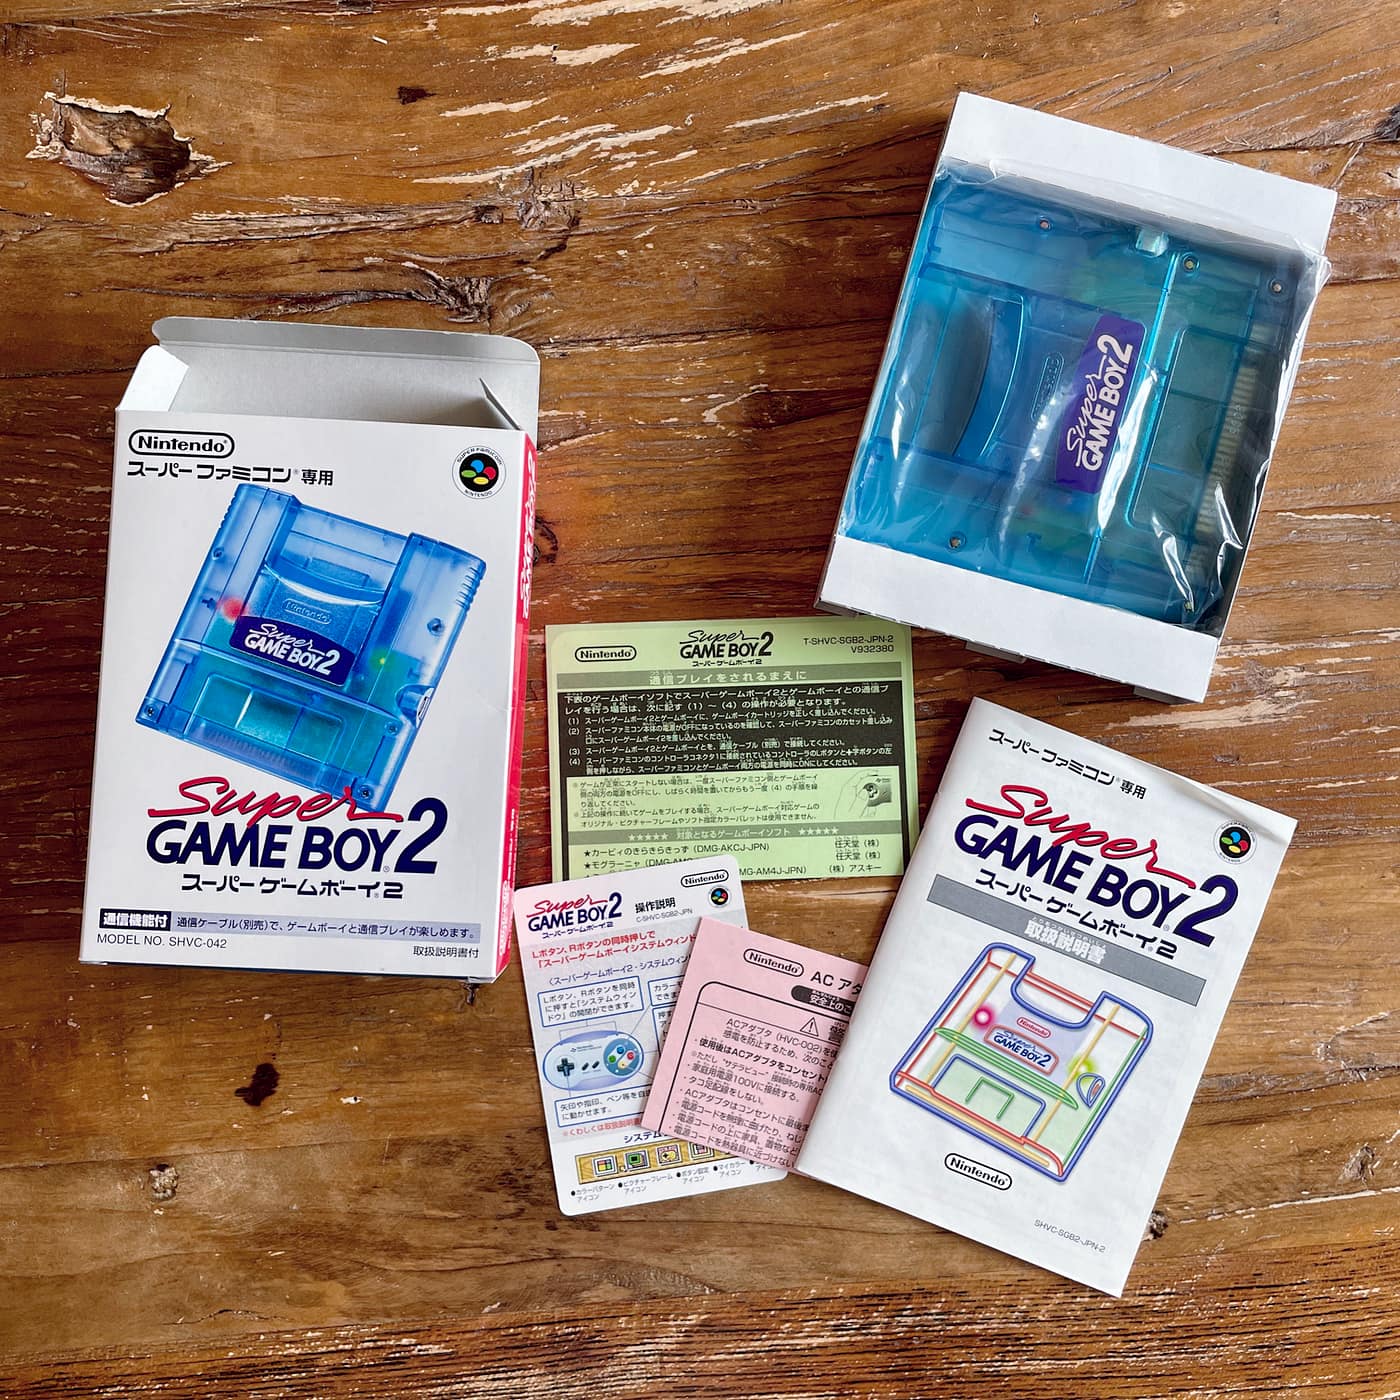 A Super Game Boy 2 accessory, original box, and instruction booklet lay on a wooden table. The cartridge is transparent blue, exposing the electronics inside.